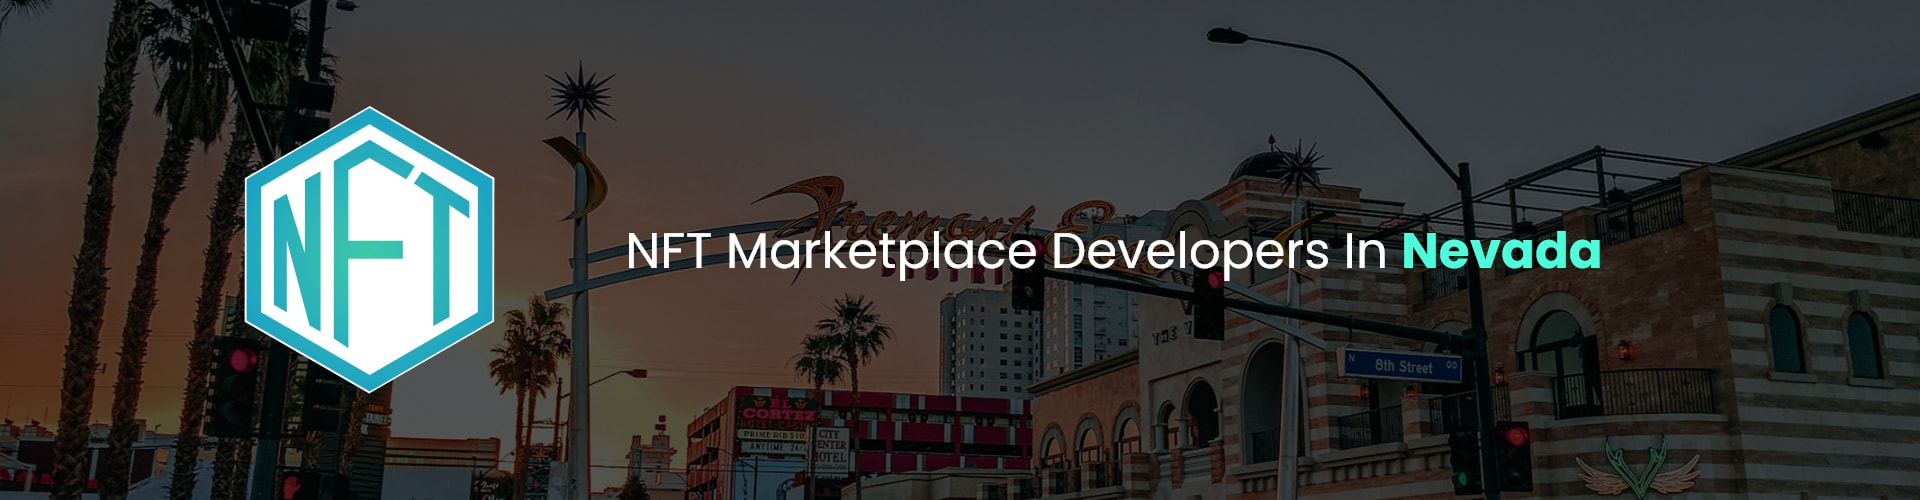 hire nft marketplace developers in nevada